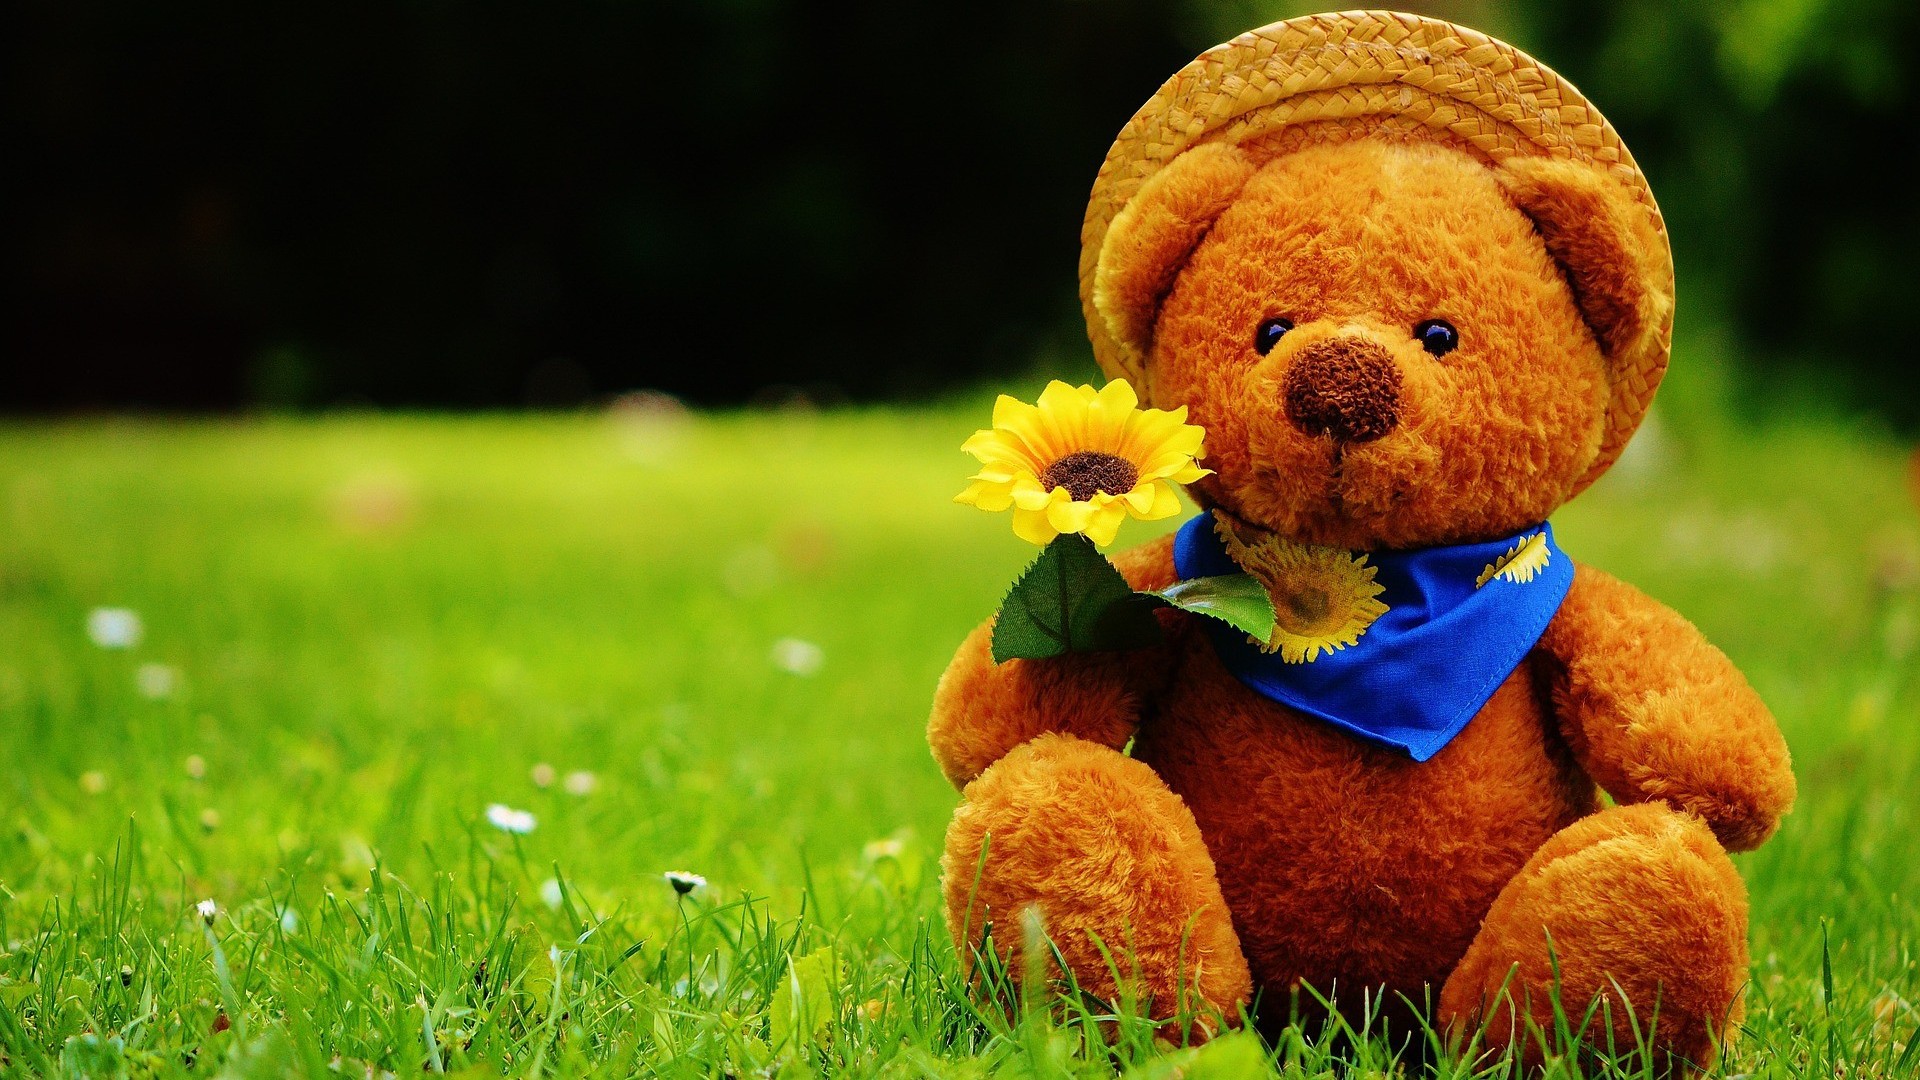 Computer Wallpapers Cute Teddy Bear With Image Resolution - Day I Met You -  1920x1080 Wallpaper 